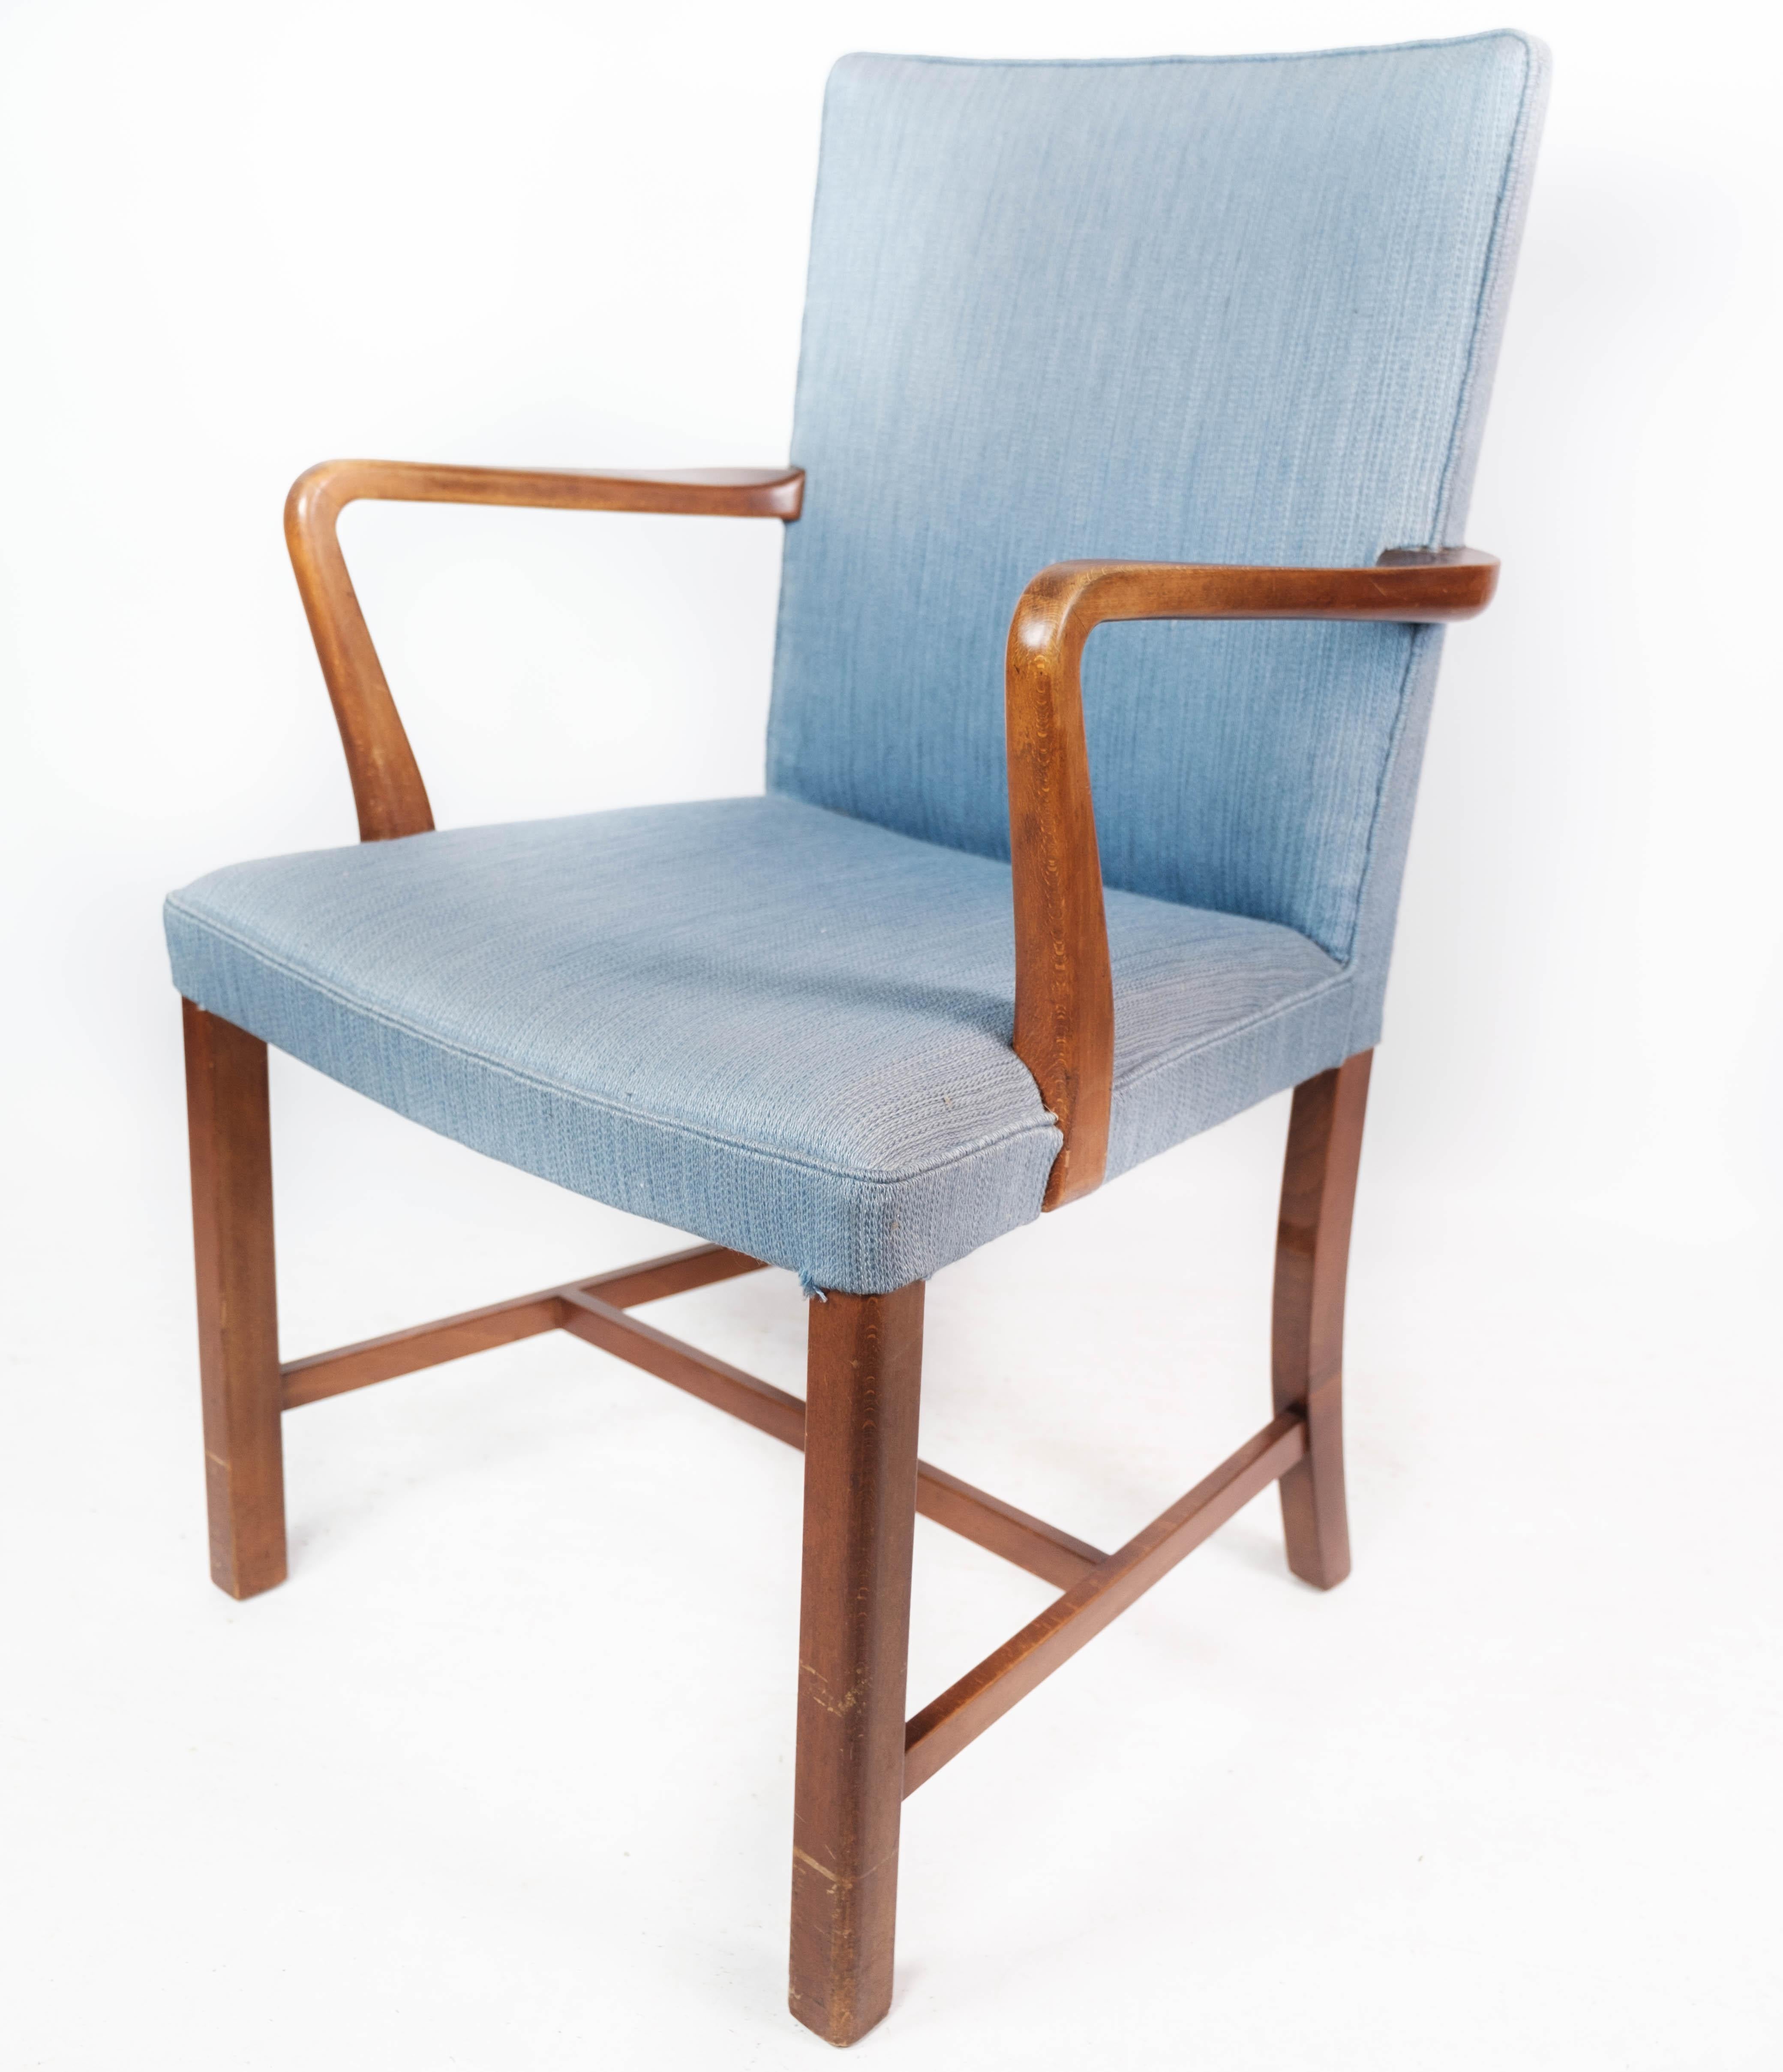 Armchair in mahogany and upholstered with light blue fabric by Fritz Hansen. The chair is in great vintage condition.